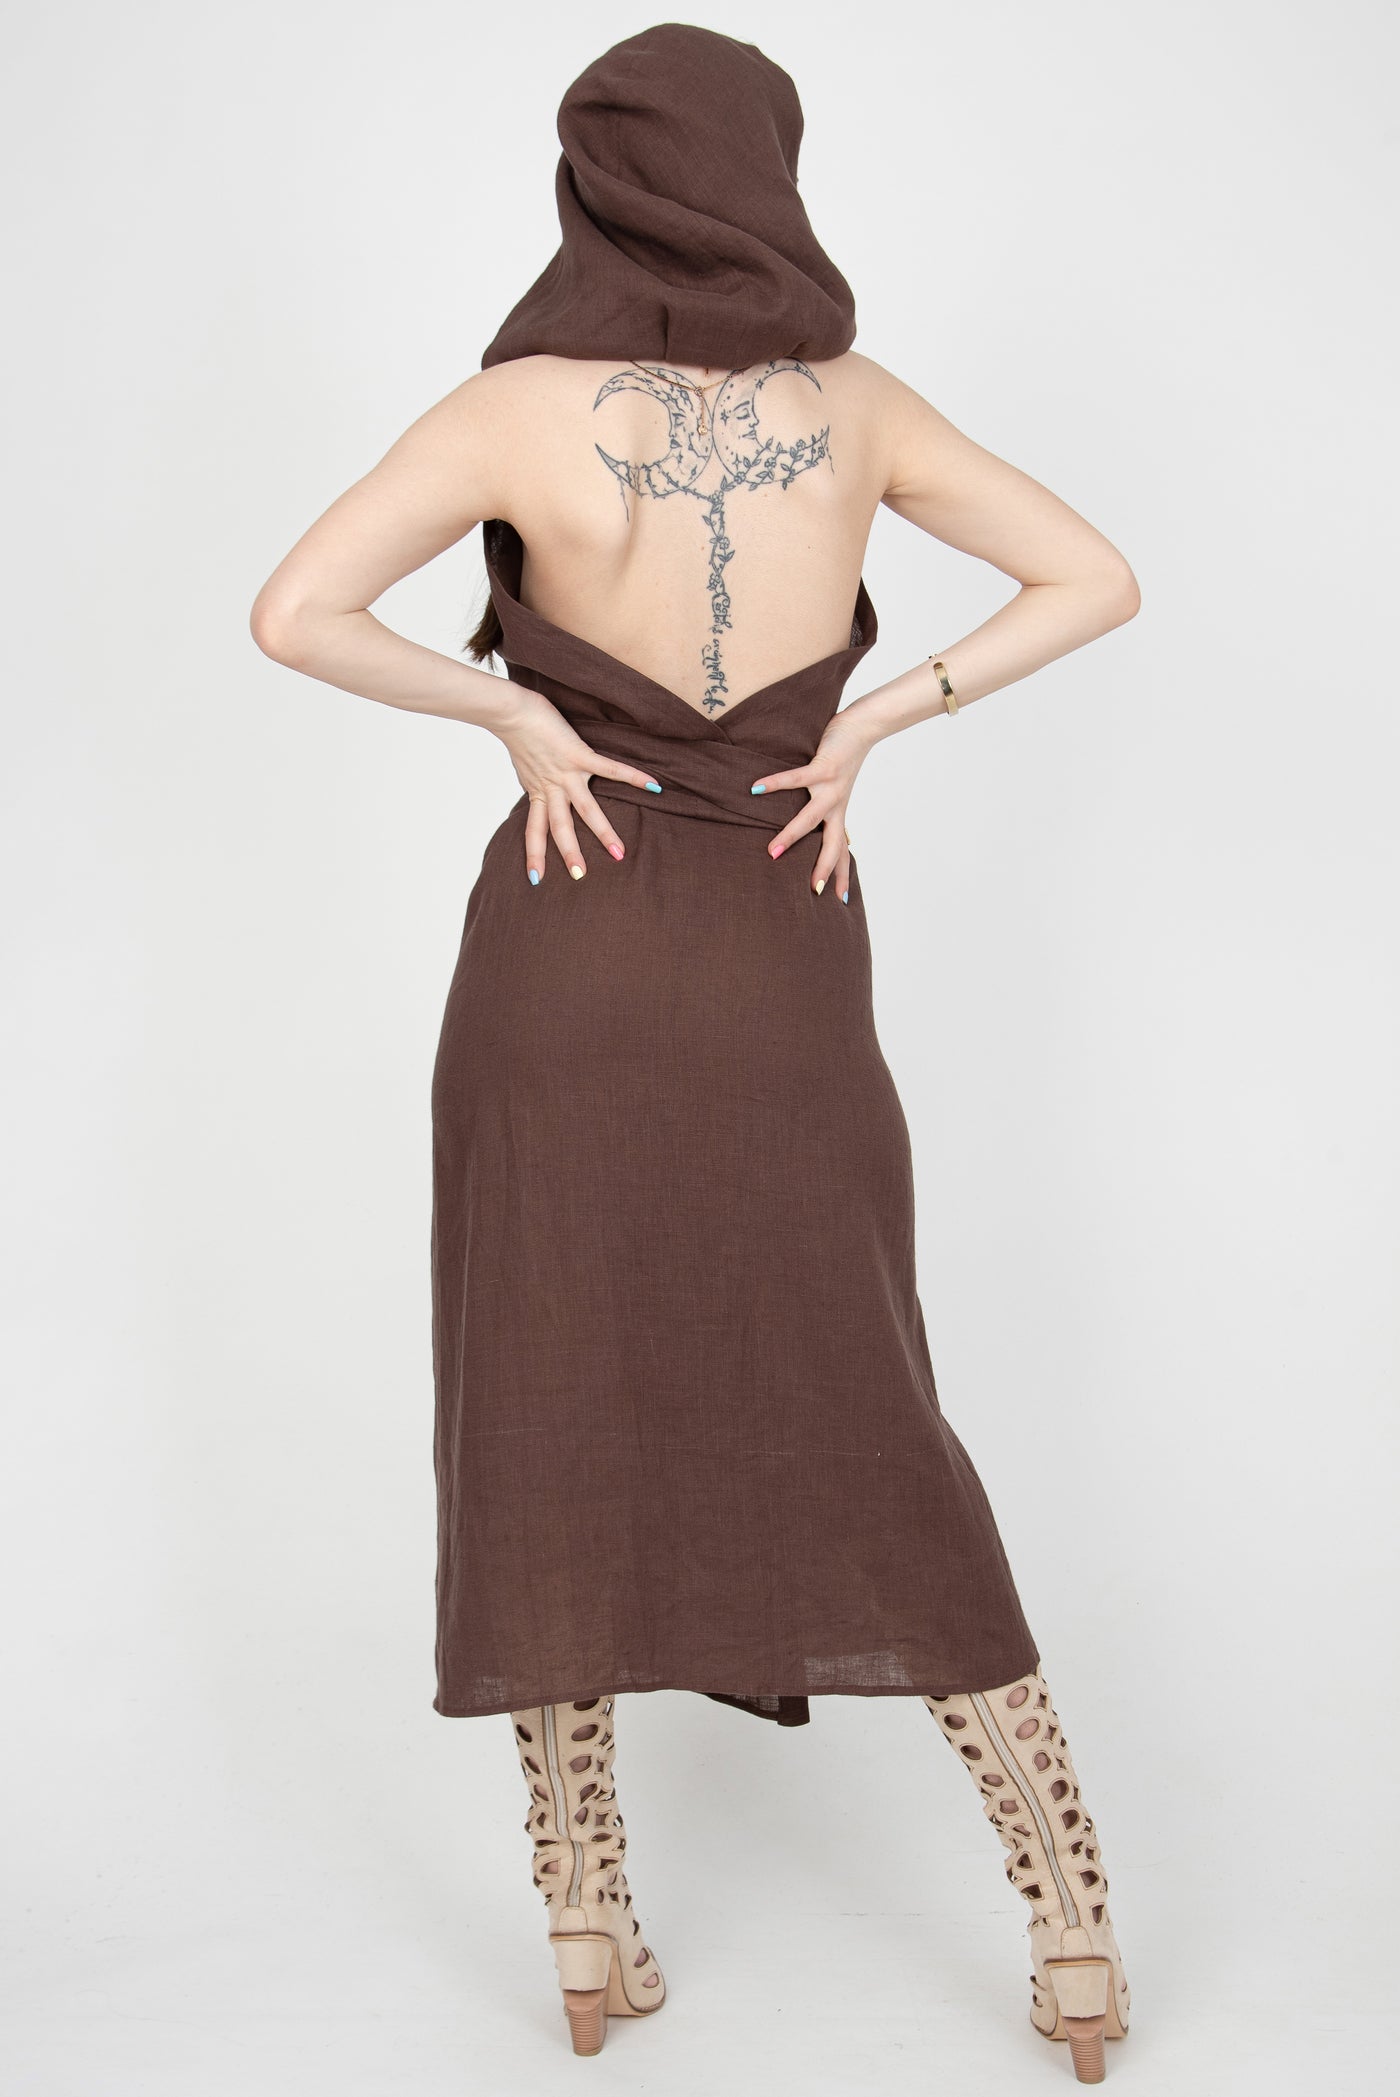 Brown hooded dress with open back F2311